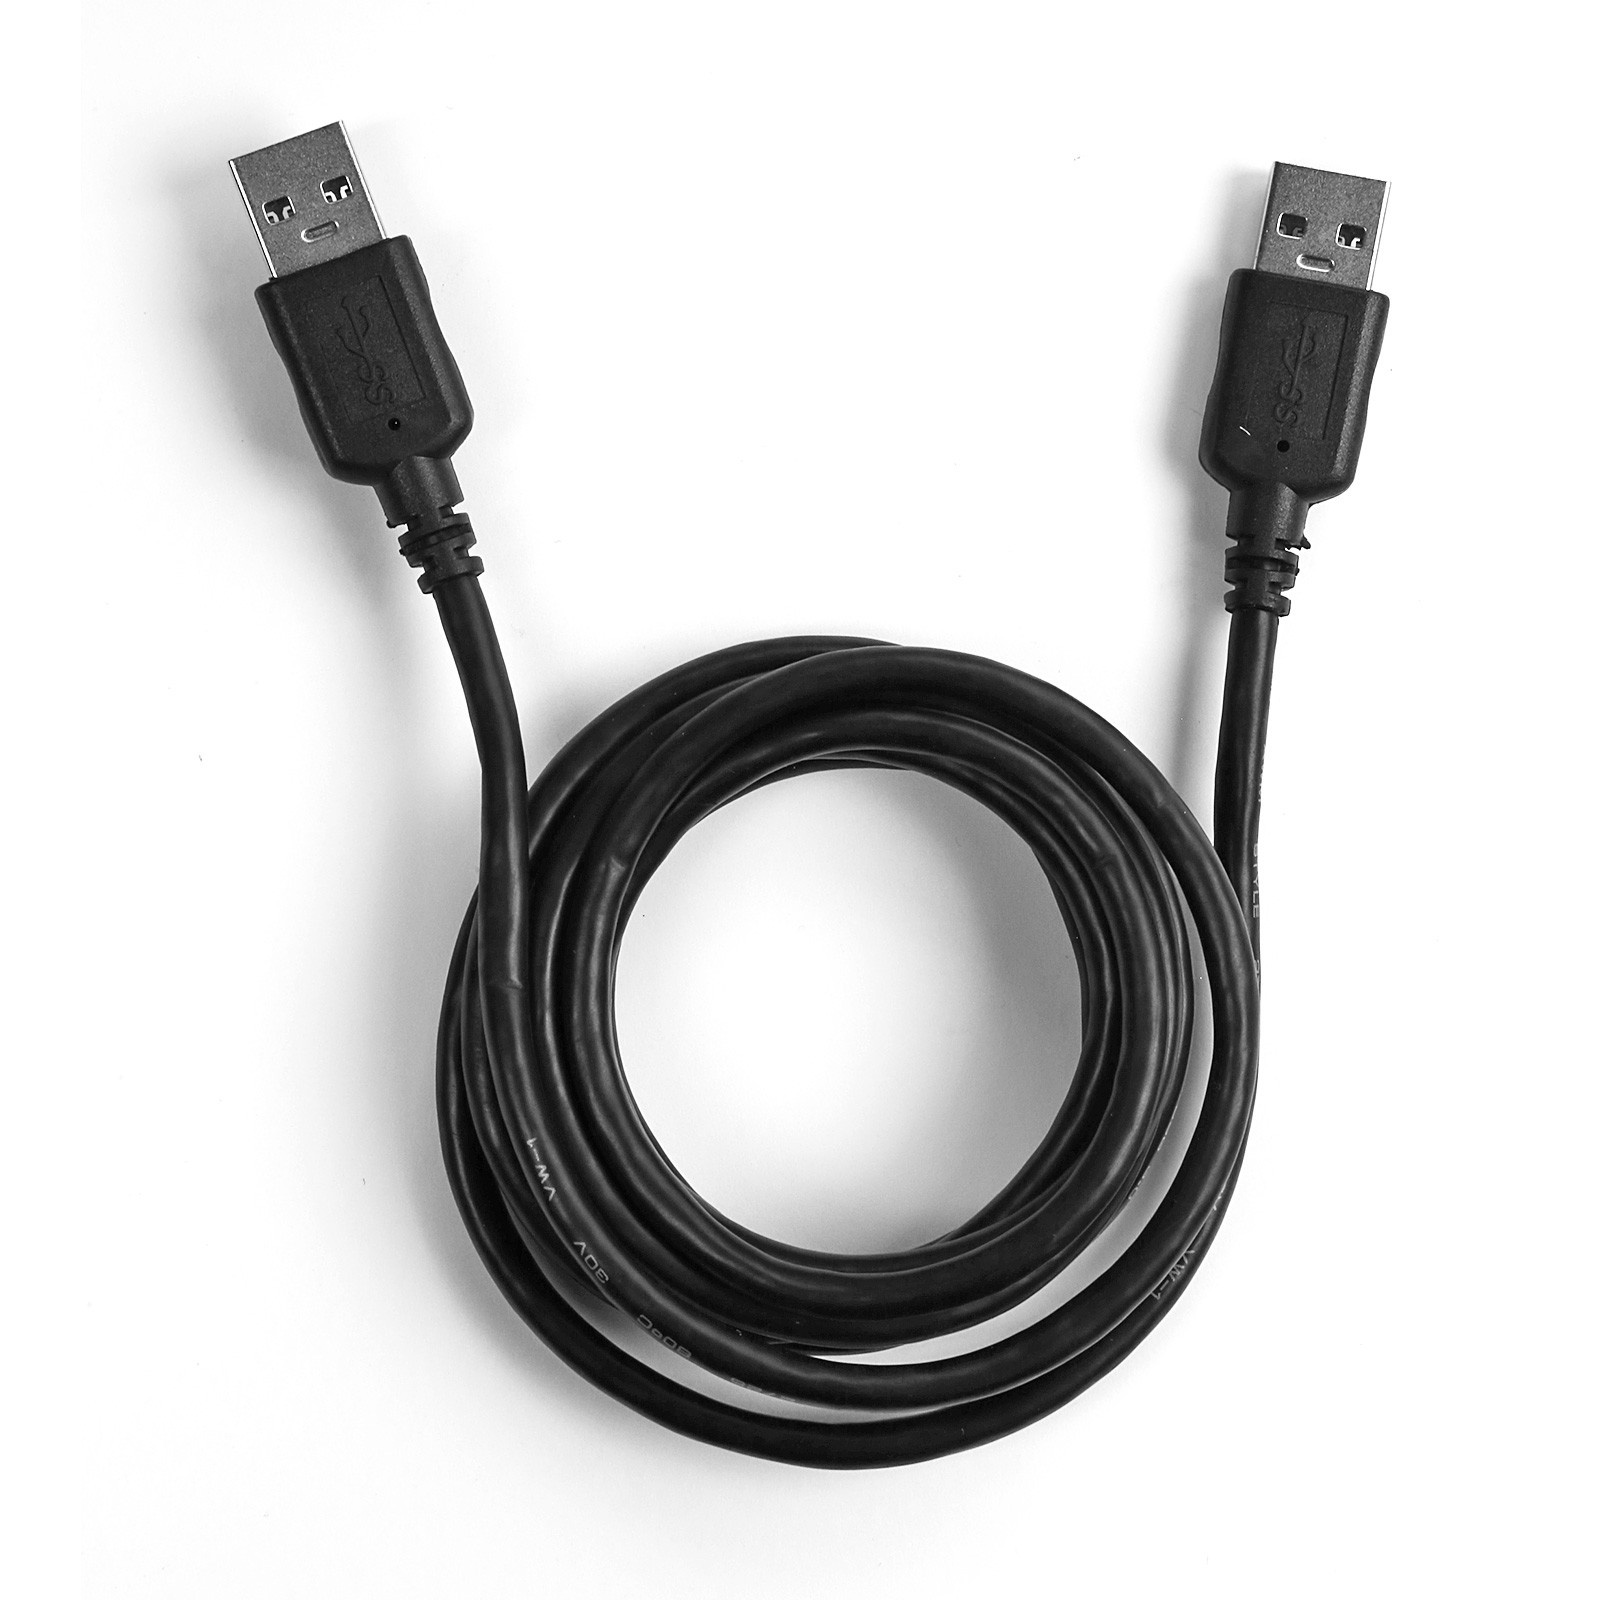 EKON USB extension cable 3.0 type A male to type A female length 1,8 m